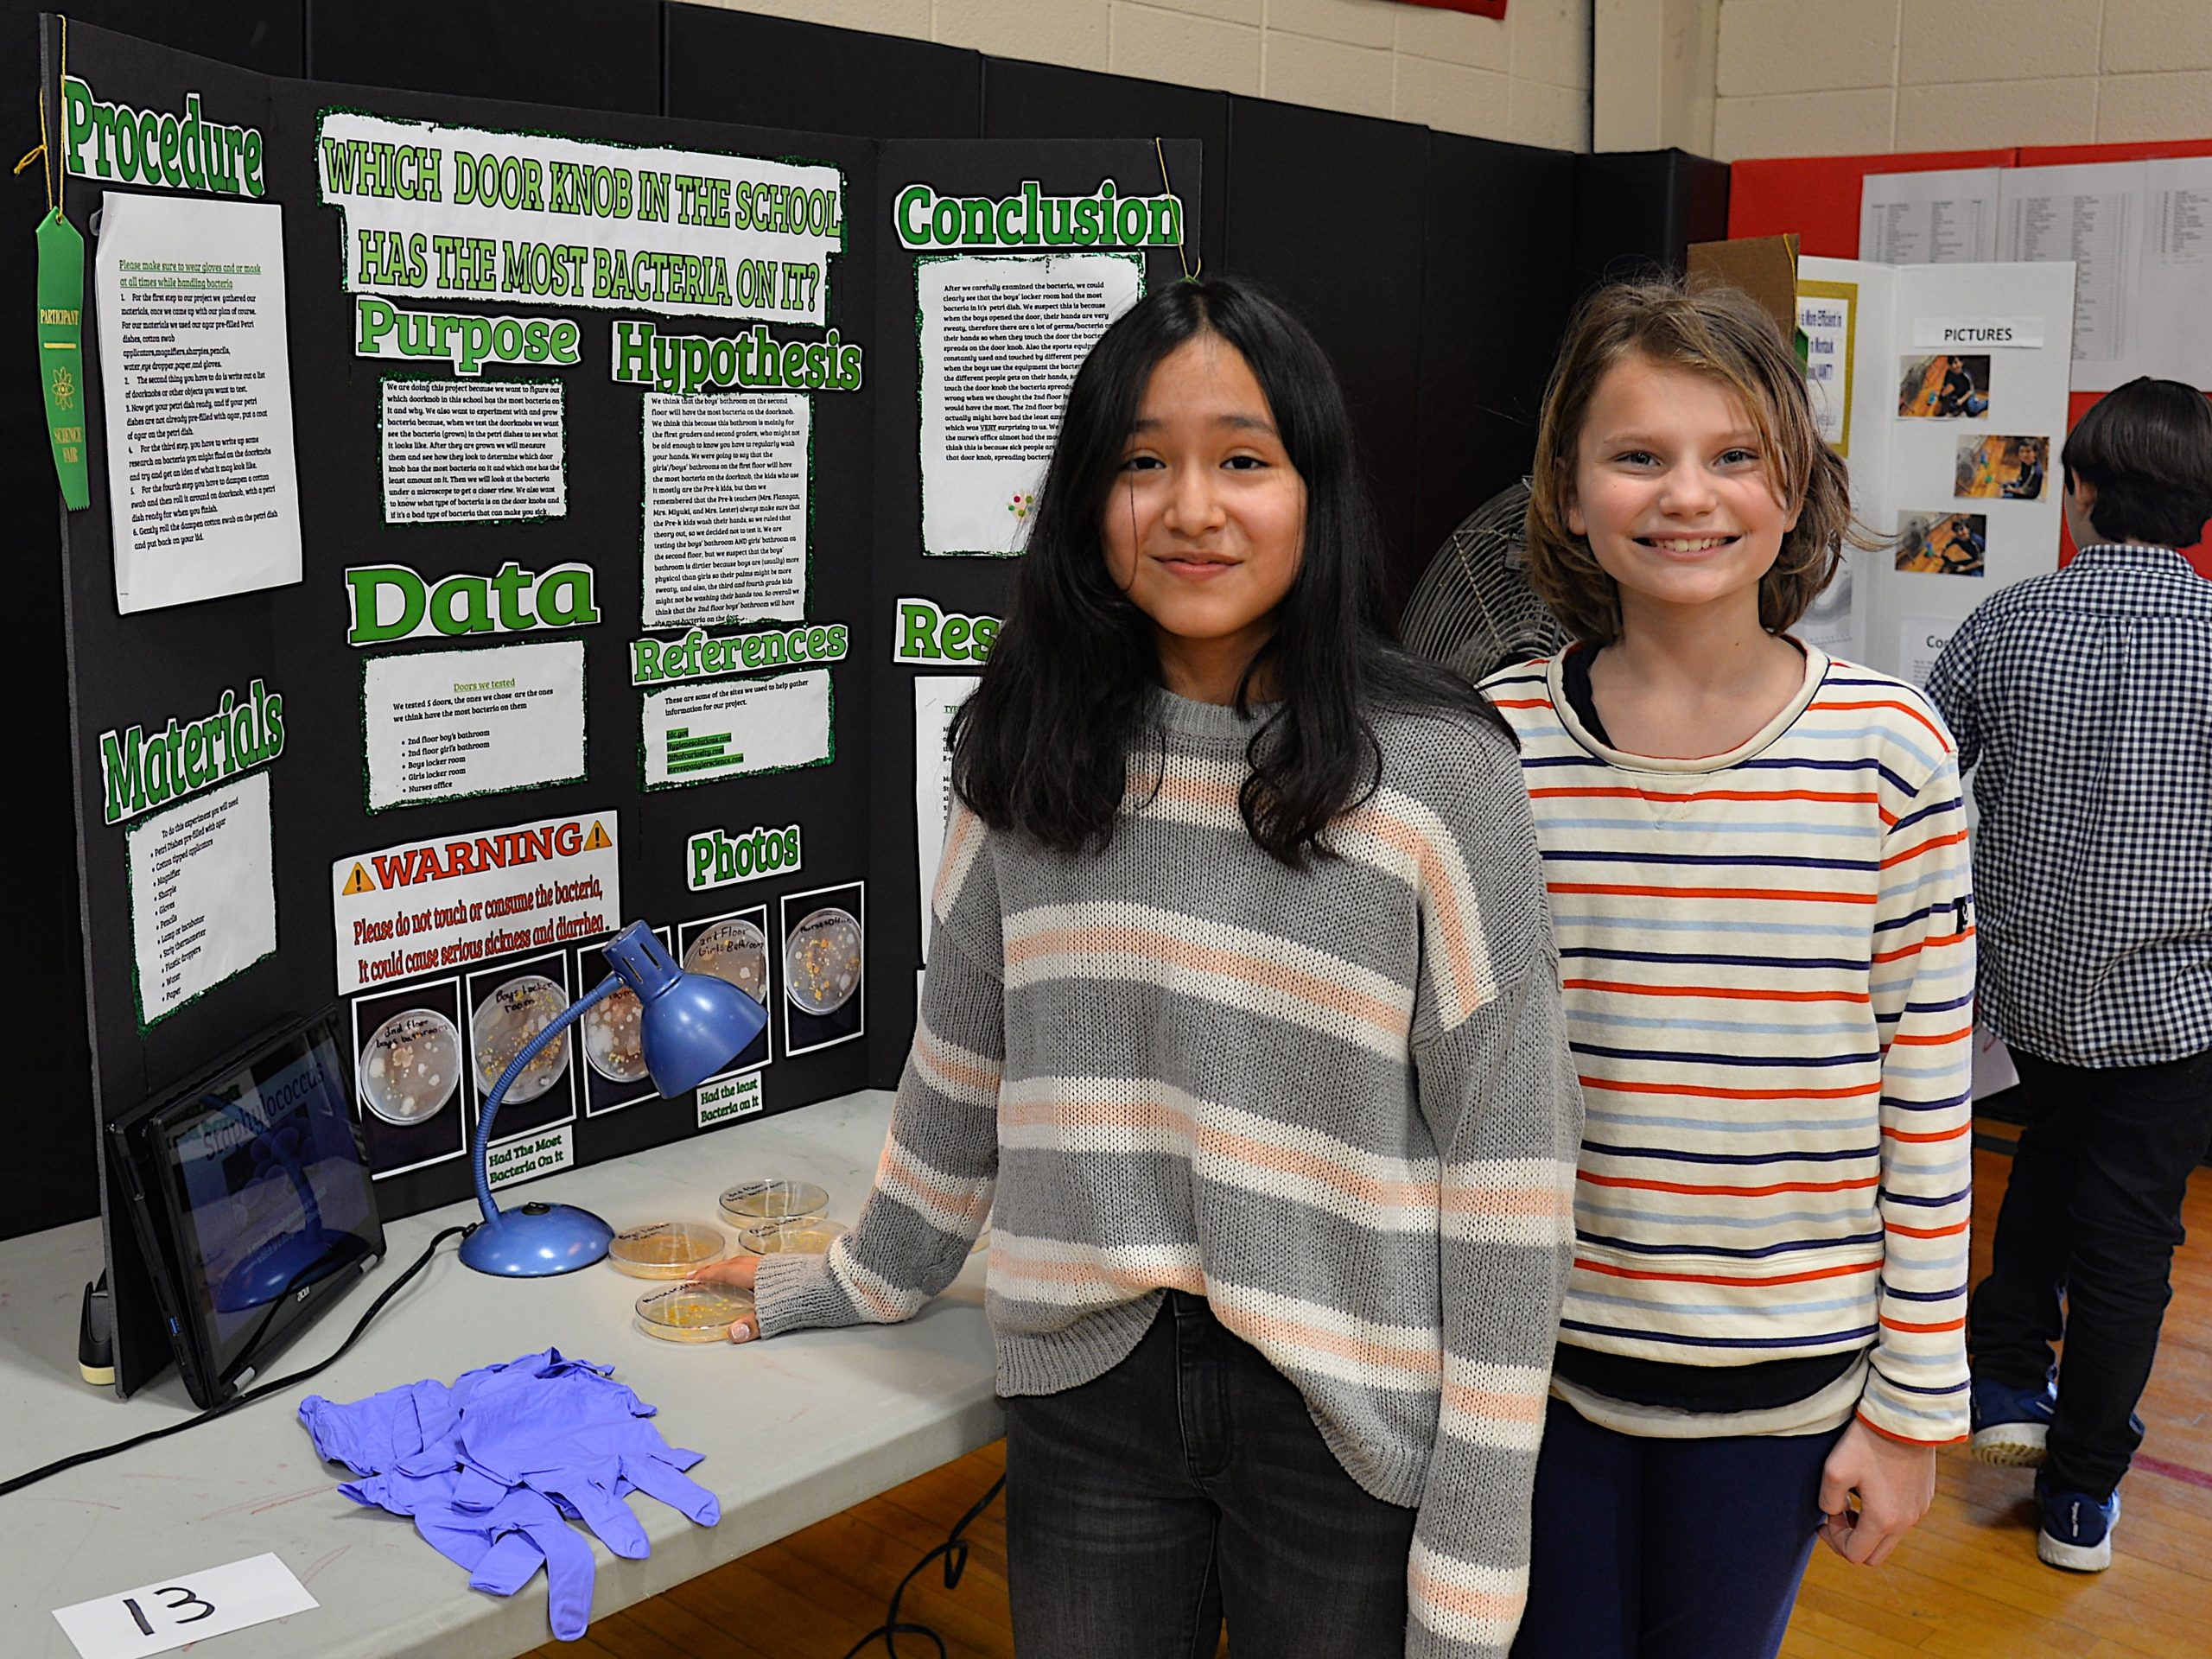 Montauk School and the Concerned Citizens of Montauk partnered for the annual Montauk School Science Fair on Friday. Amanda Arias's and Bea Flight’s project was to determine which school doorknobs contained the most bacteria. KYRIL BROMLEY